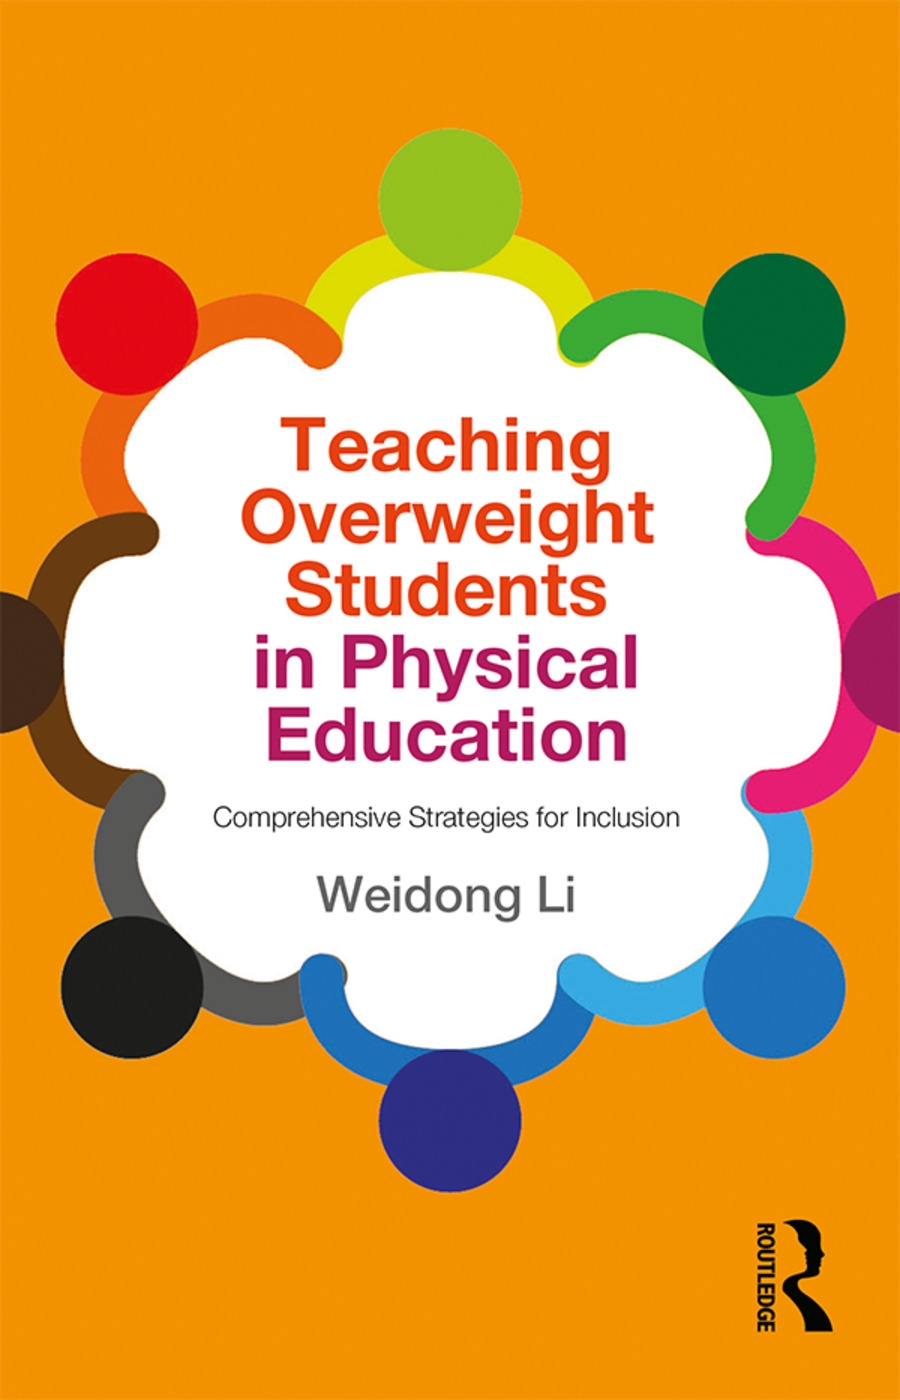 Teaching Overweight Students in Physical Education: Comprehensive Strategies for Inclusion